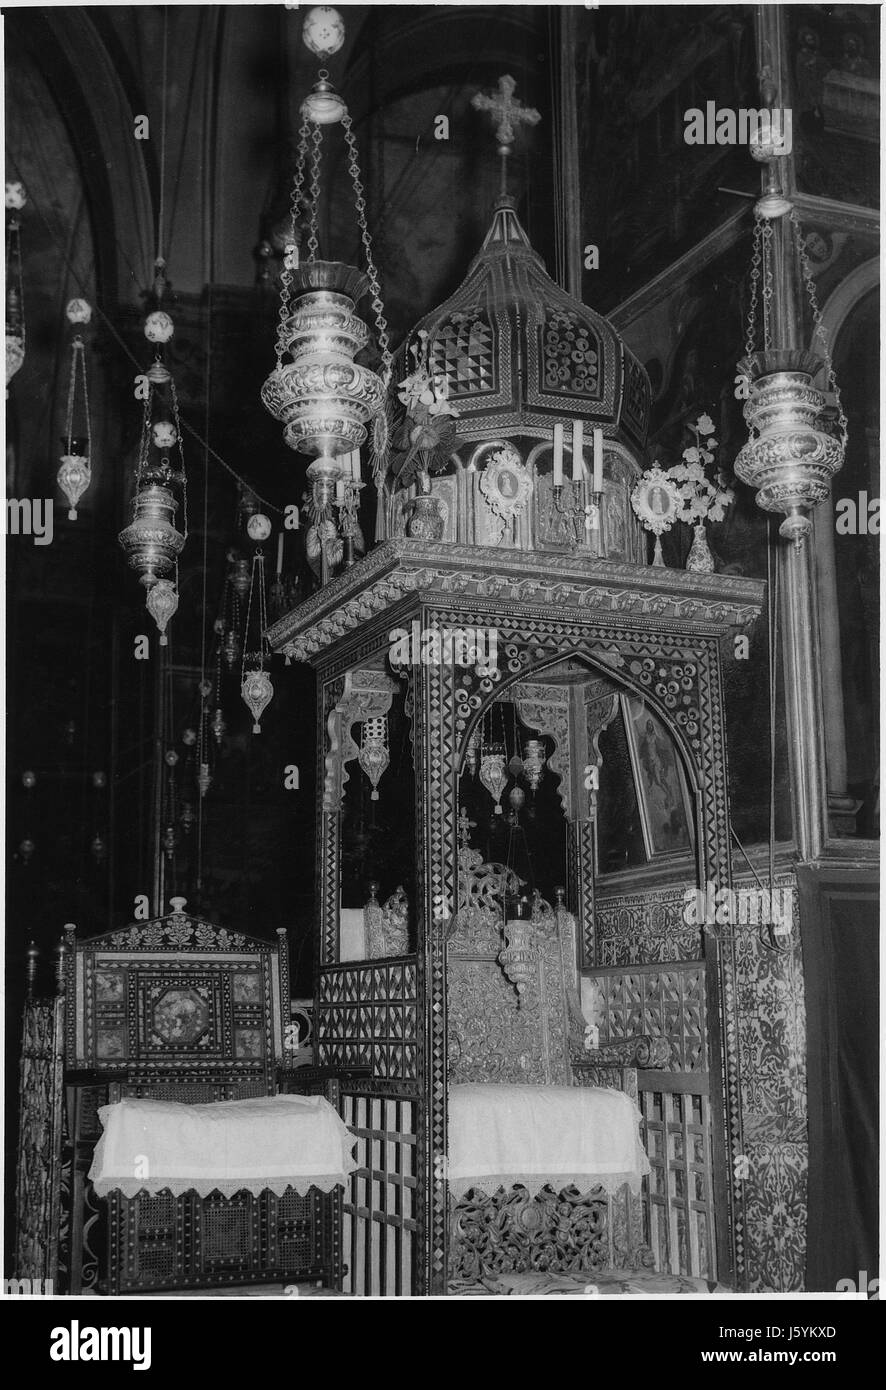 Throne of St. James the Less (R), Seat of Armenian Orthodox Patriarch (L), Cathedral of St James, Old City, Jerusalem, 1960 Stock Photo